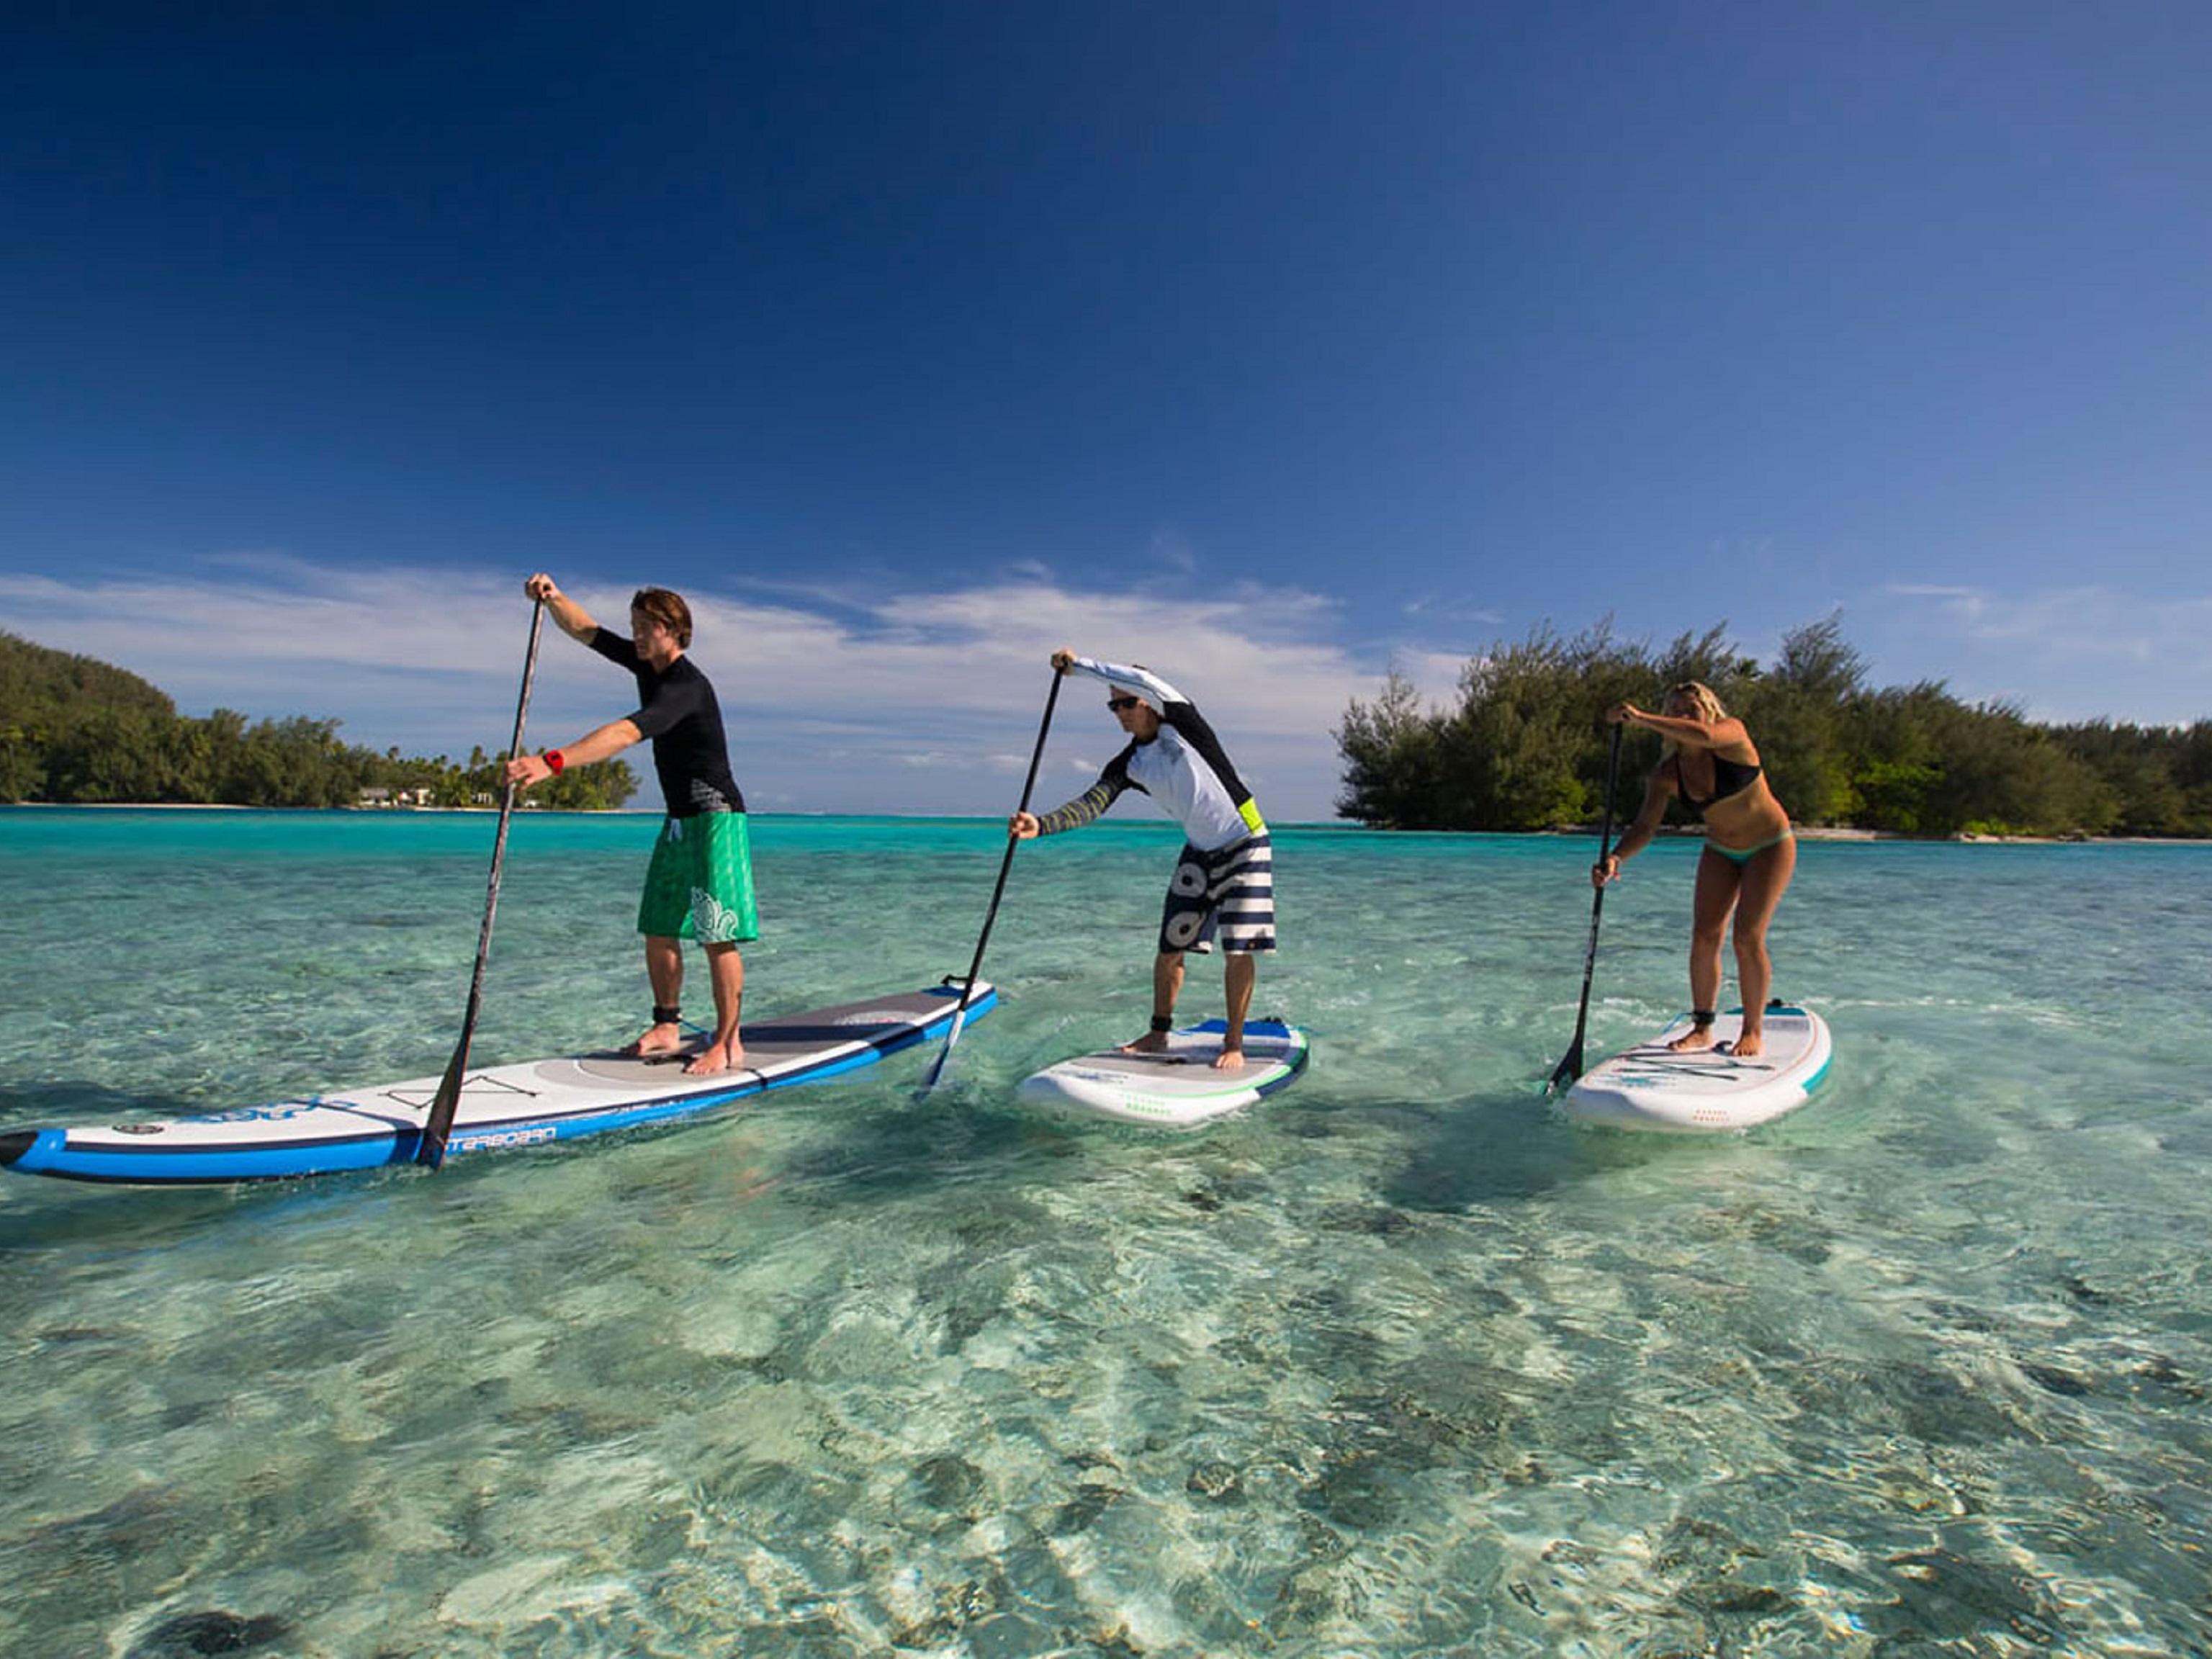 Paddle boarding is extremely popular and great for 1st timers